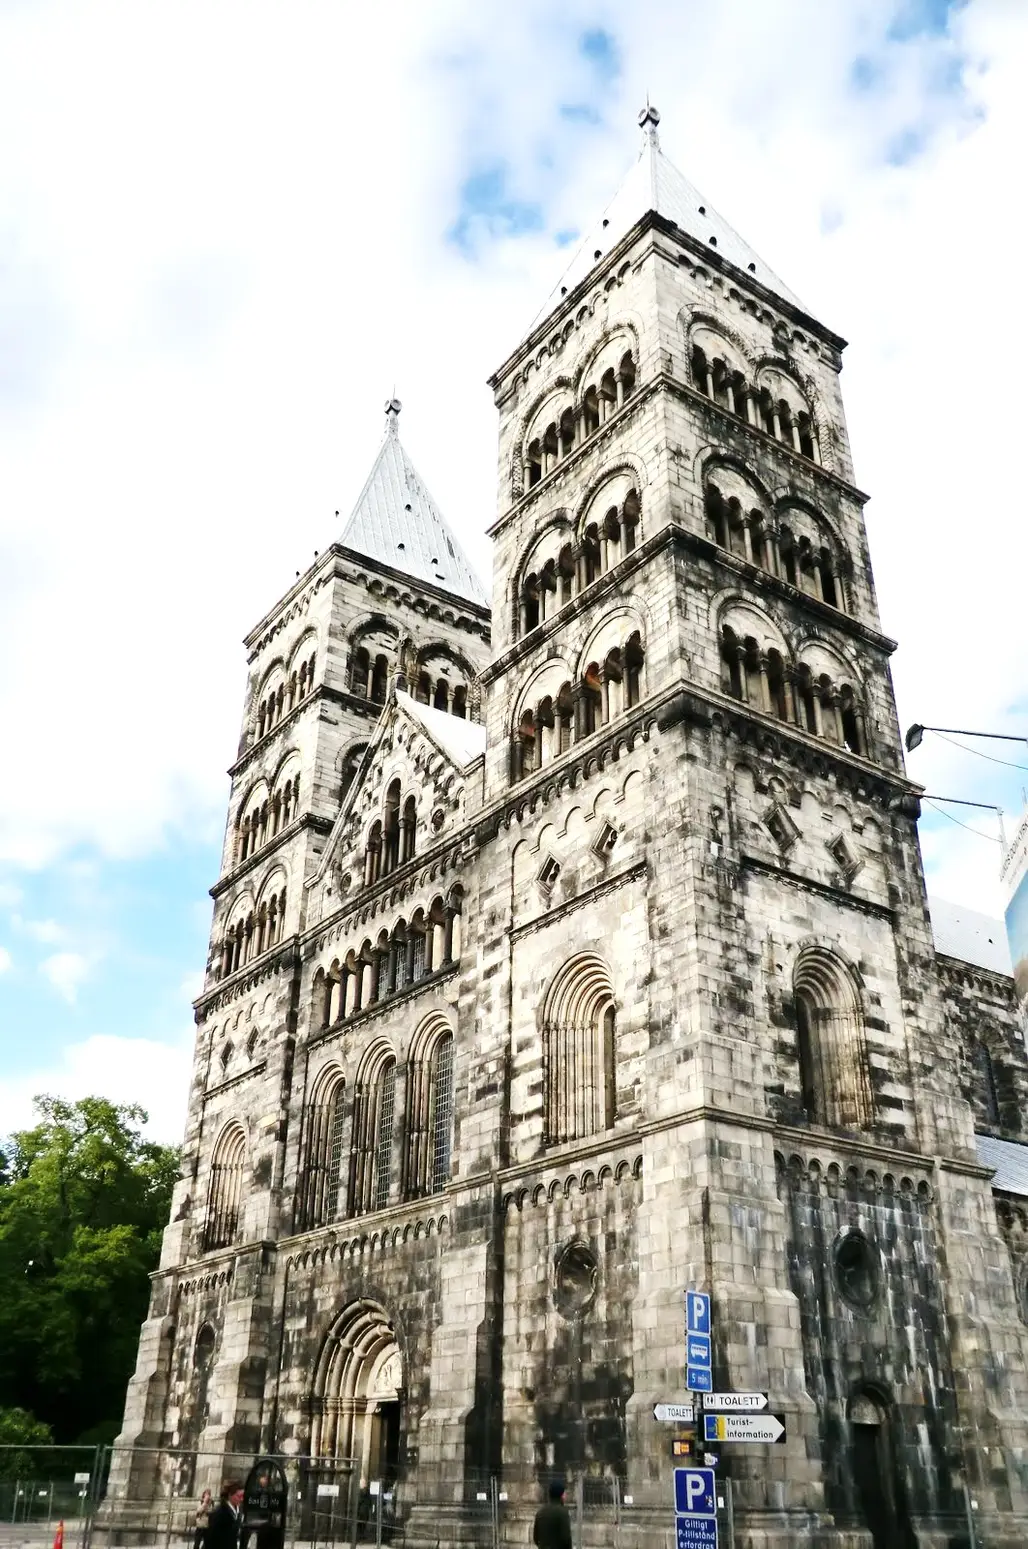 The Lund Cathedral